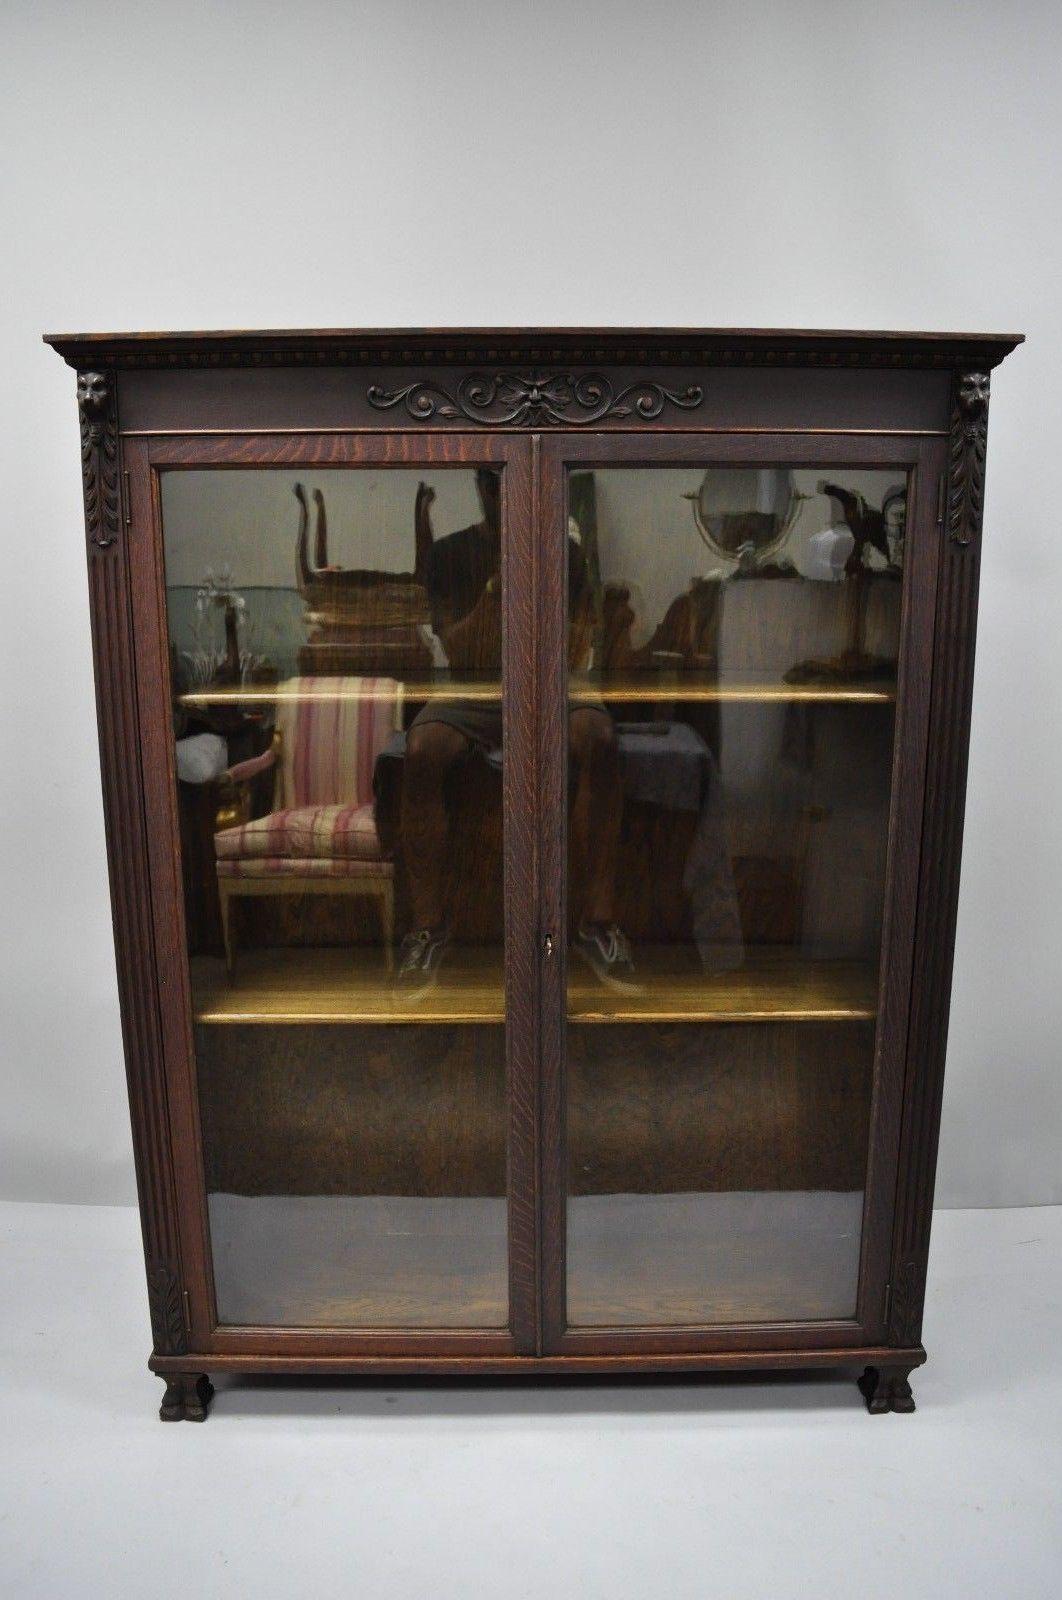 Antique oakwood Victorian glass two door bookcase with claw feet, carved lions, and northwind face. Item features carved claw feet, lion and northwind faces, beautiful wood grain, two glass swing doors, two adjustable wooden shelves, and working